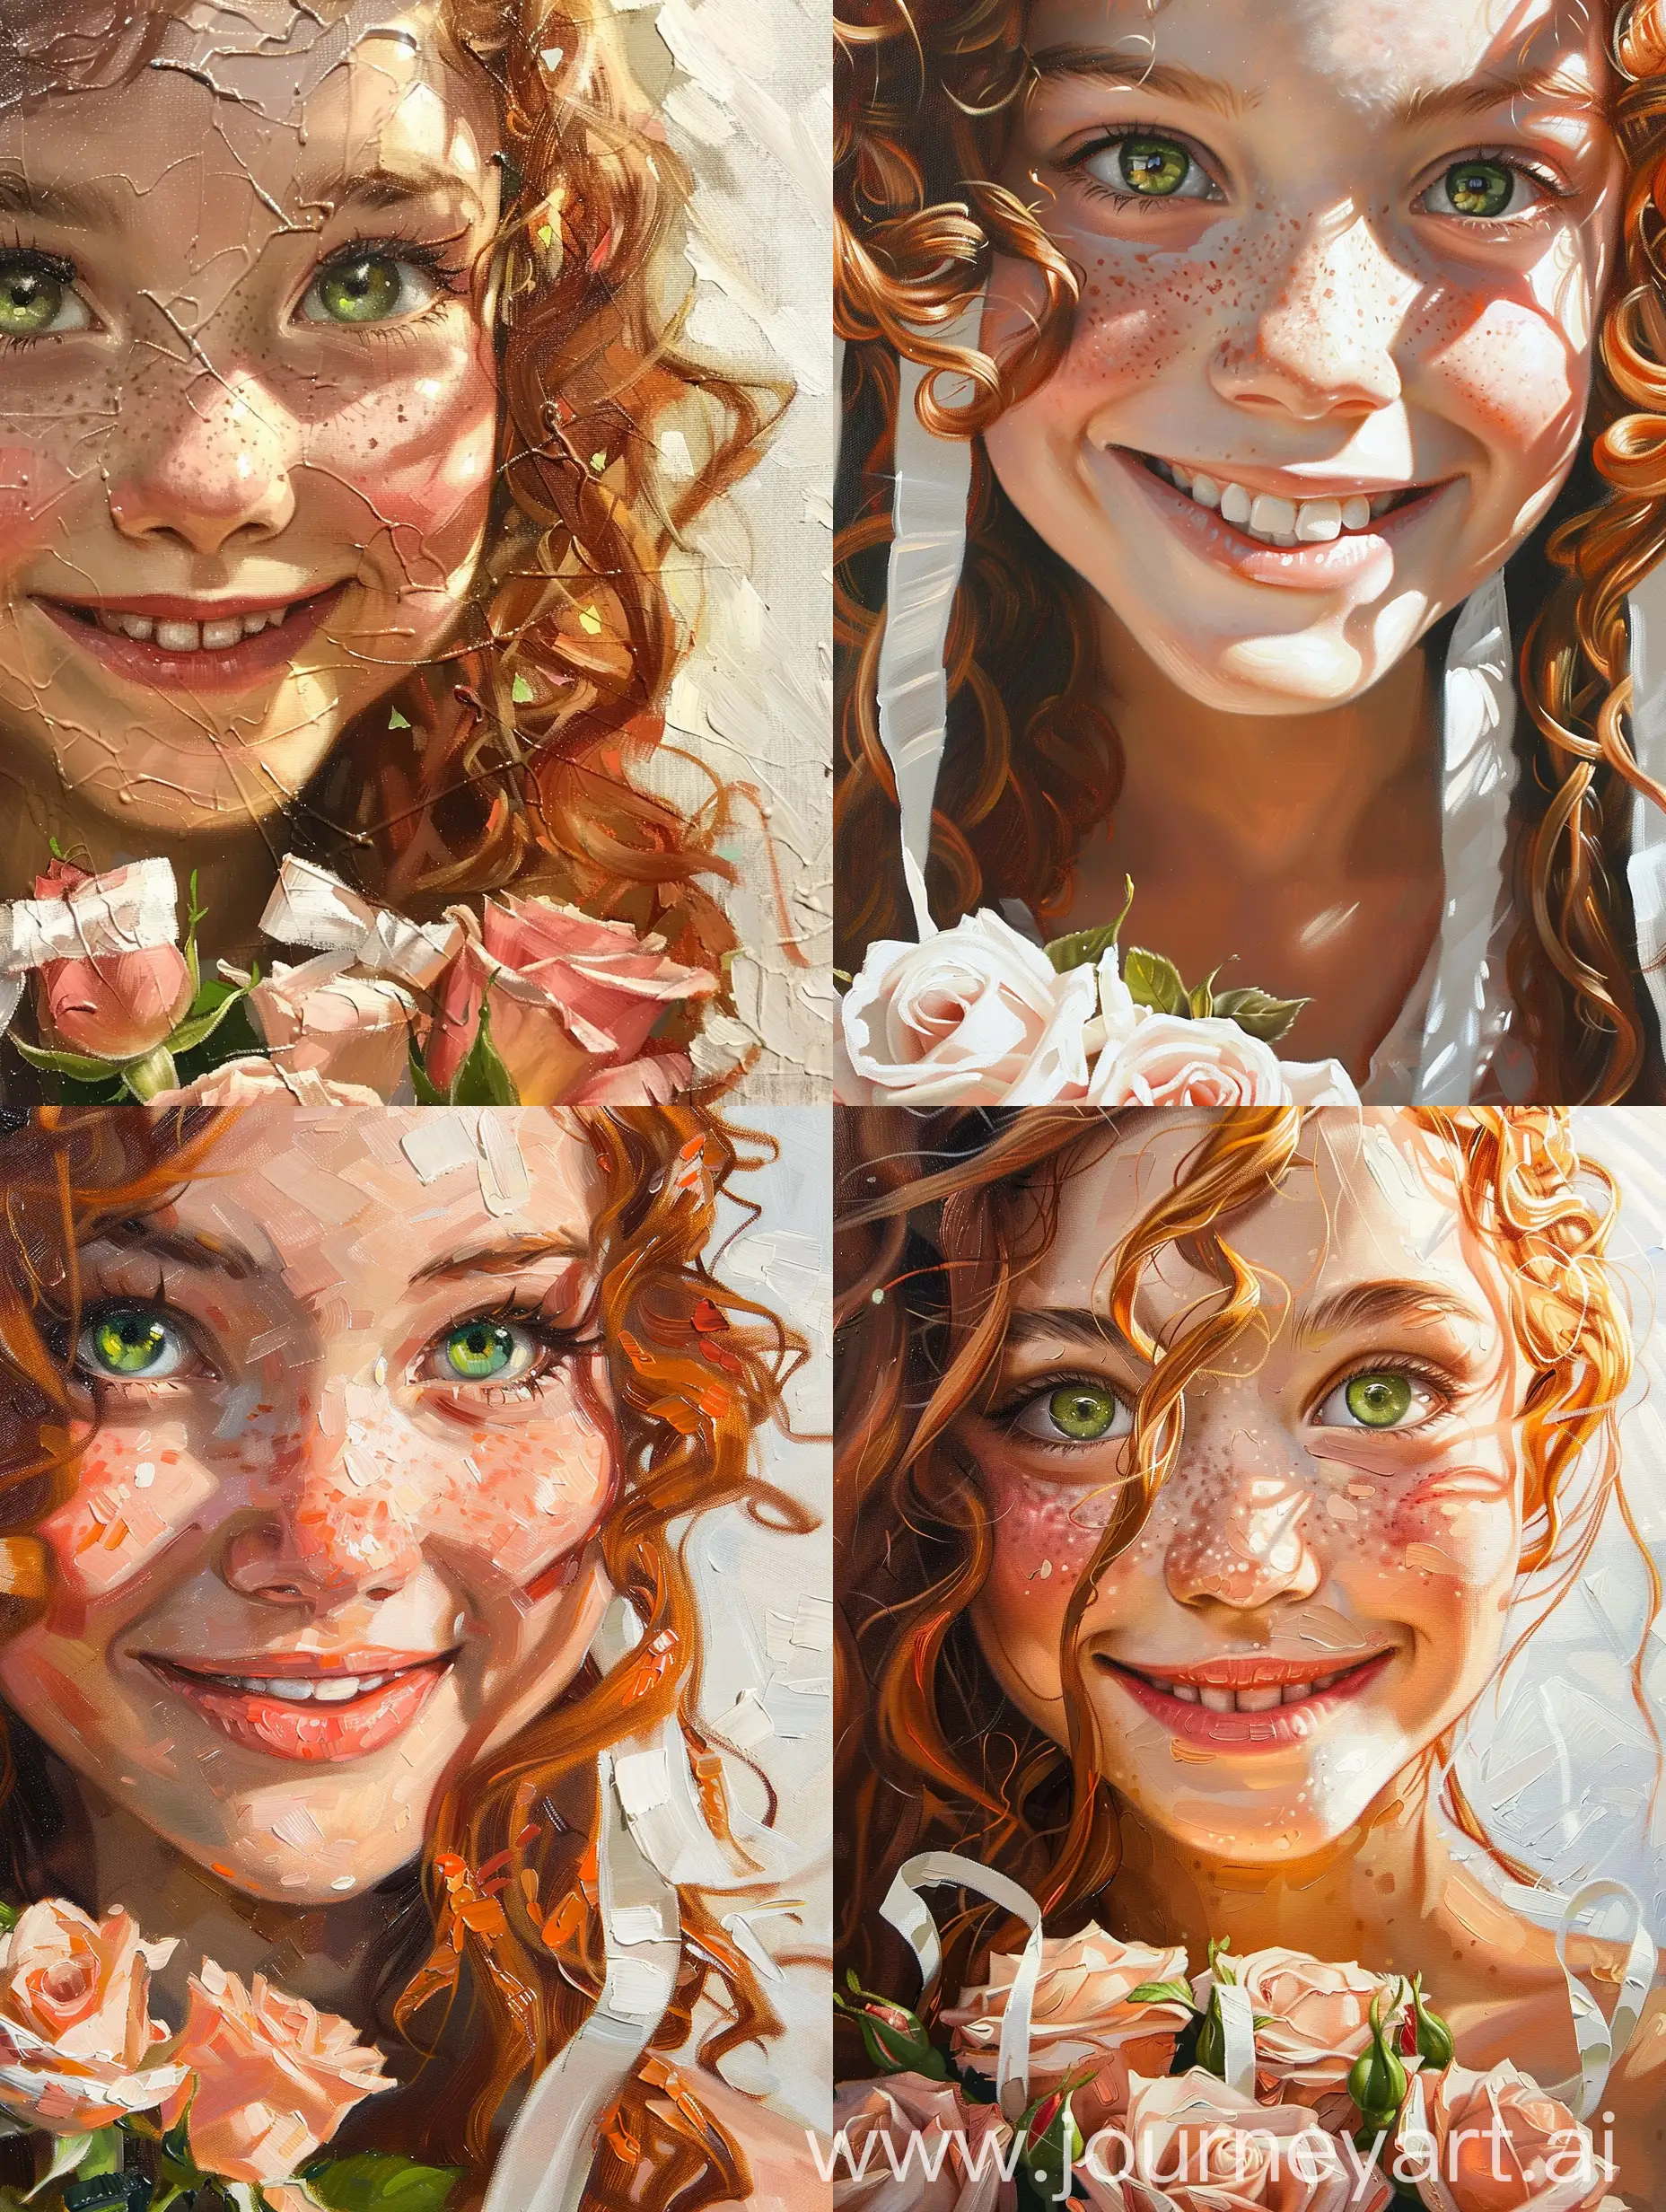 hand-painted, hand-painted deep close-up captures an oil painting of a smiling face, close-up portrait, painting with a 16 years old girl, she has green eyes and long curly red hair with white long ribbons, holds a brunch of roses. The expression is playful and cute, forming a strong contrast of light and dark in the focus, the background is used with a white palette, the brushstrokes are simple, oil painting, strong contrast of light and dark, this child is depicted as happy, this composition creates a fun atmosphere, high resolution,, ray of sunlight, stained glass, vibrant pop art deco graffiti by Tristan Eaton and Eduardo Kobra and Erté whimsical and simple illustration aesthetic, bright colors, in the style of Clémence Guillemaud